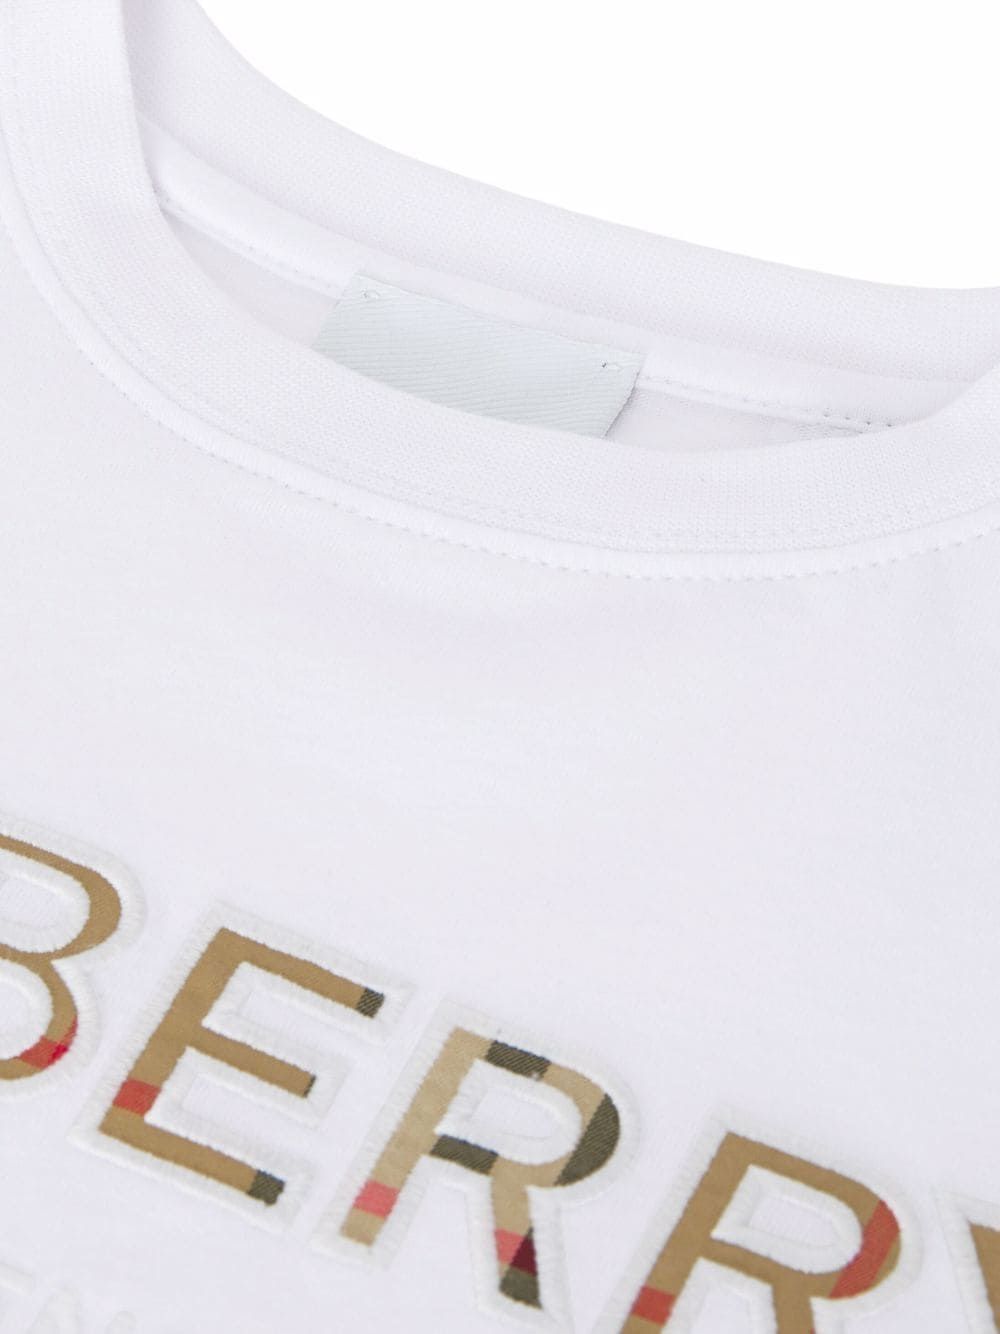 White/archive beige cotton logo-embroidered T-shirt